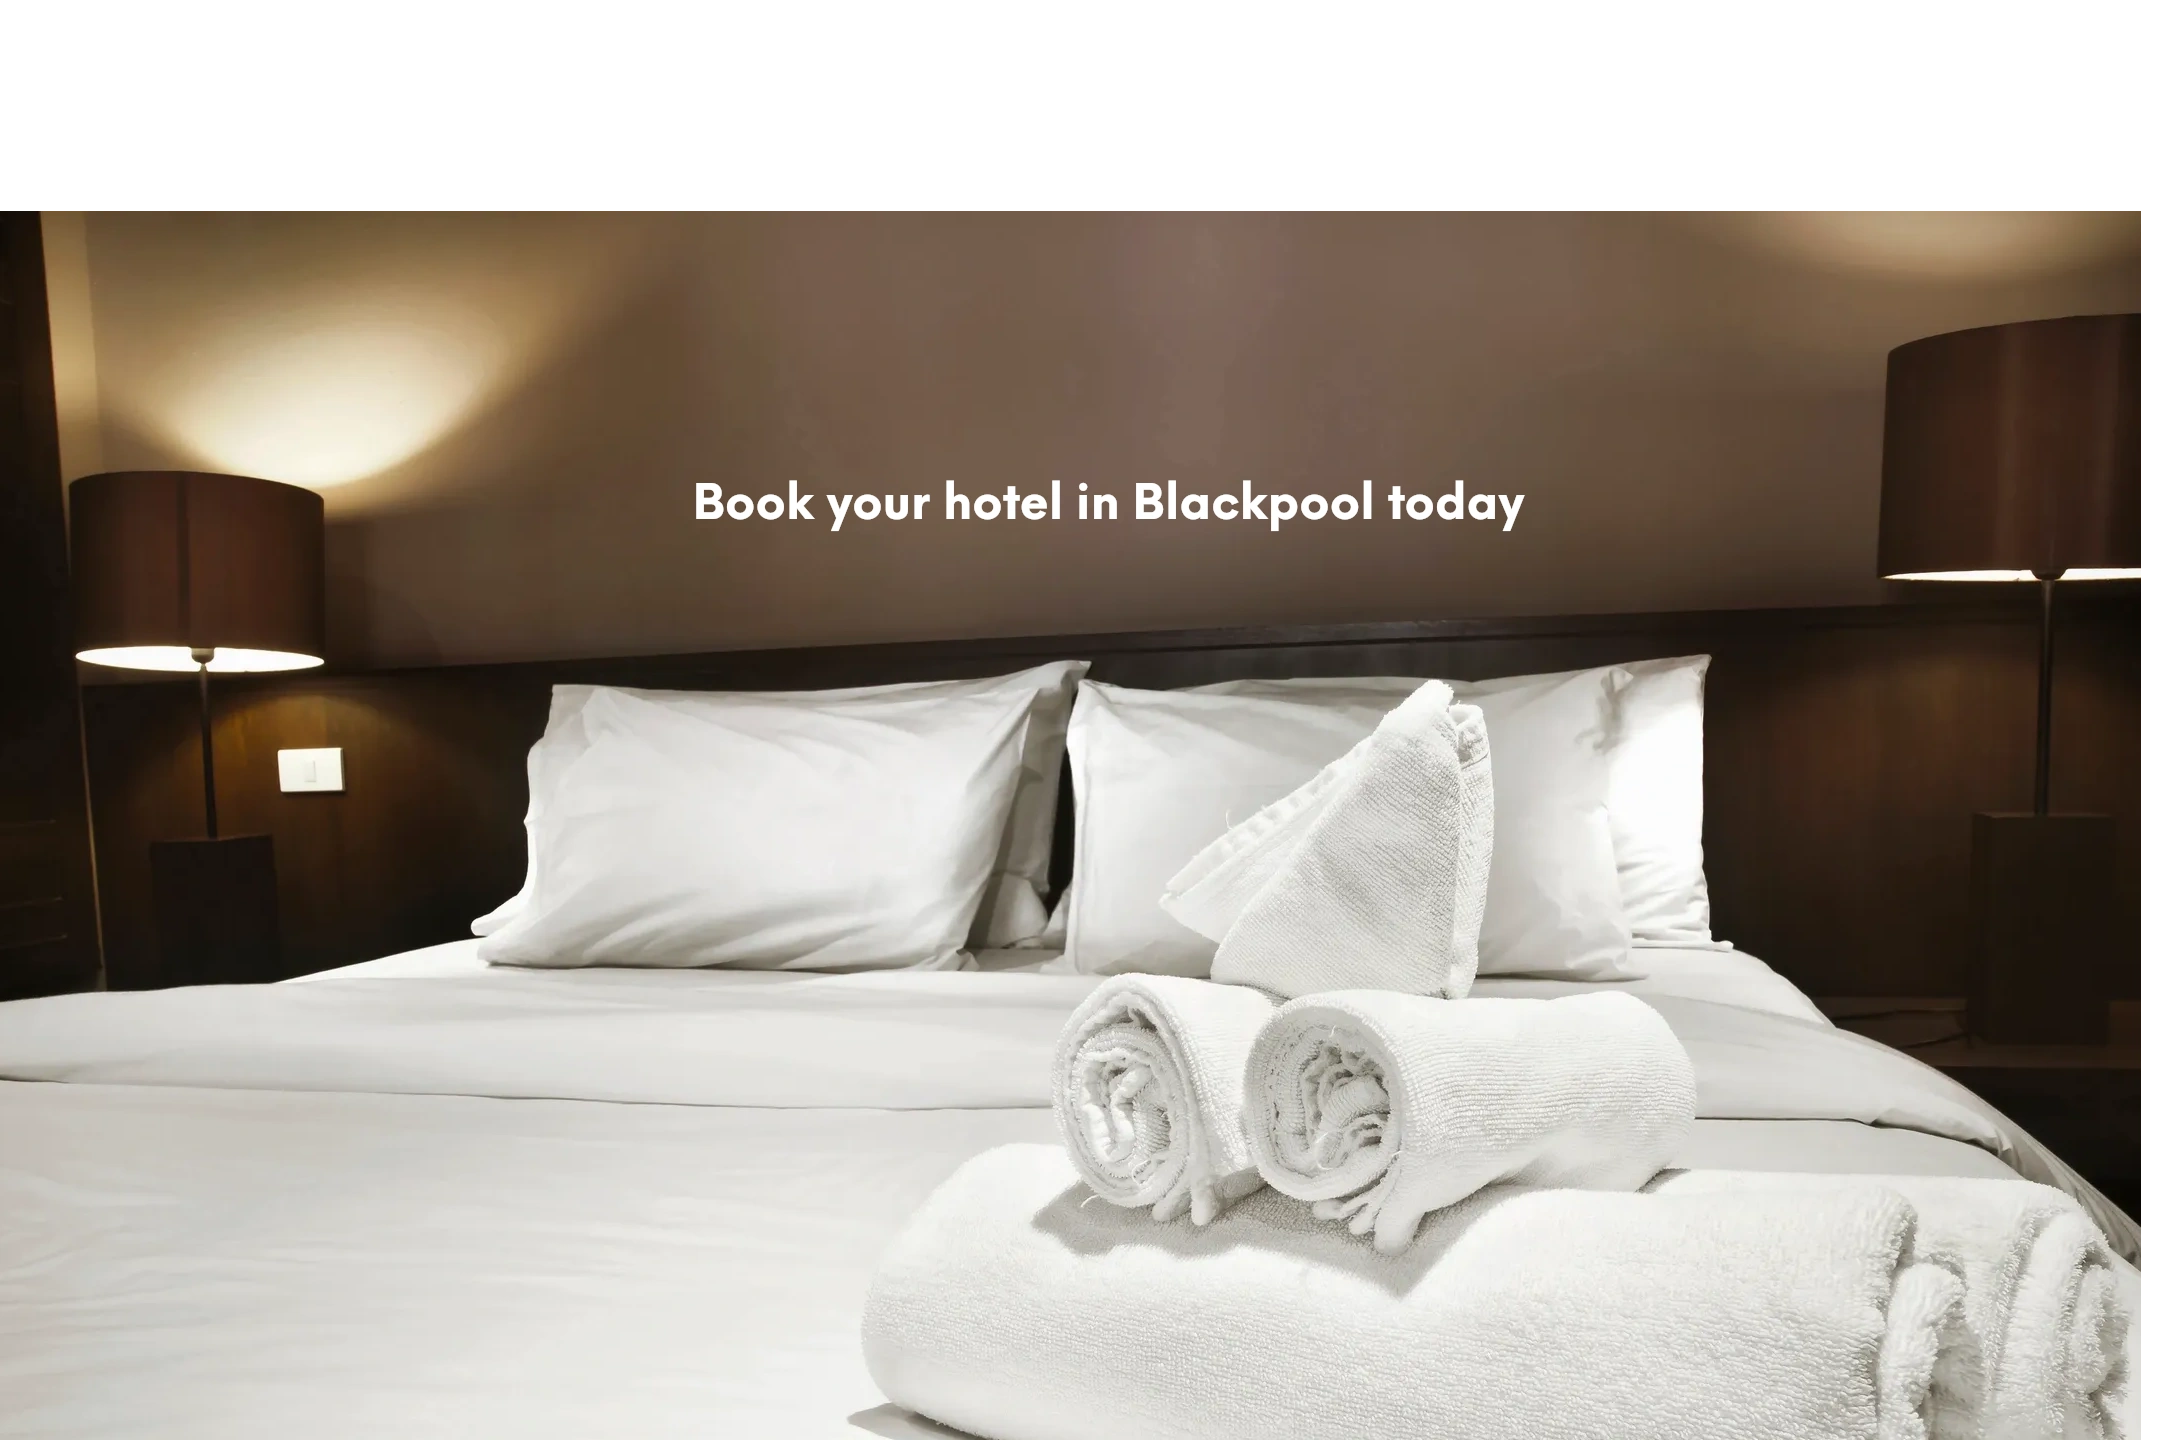 Book your hotel in Blackpool